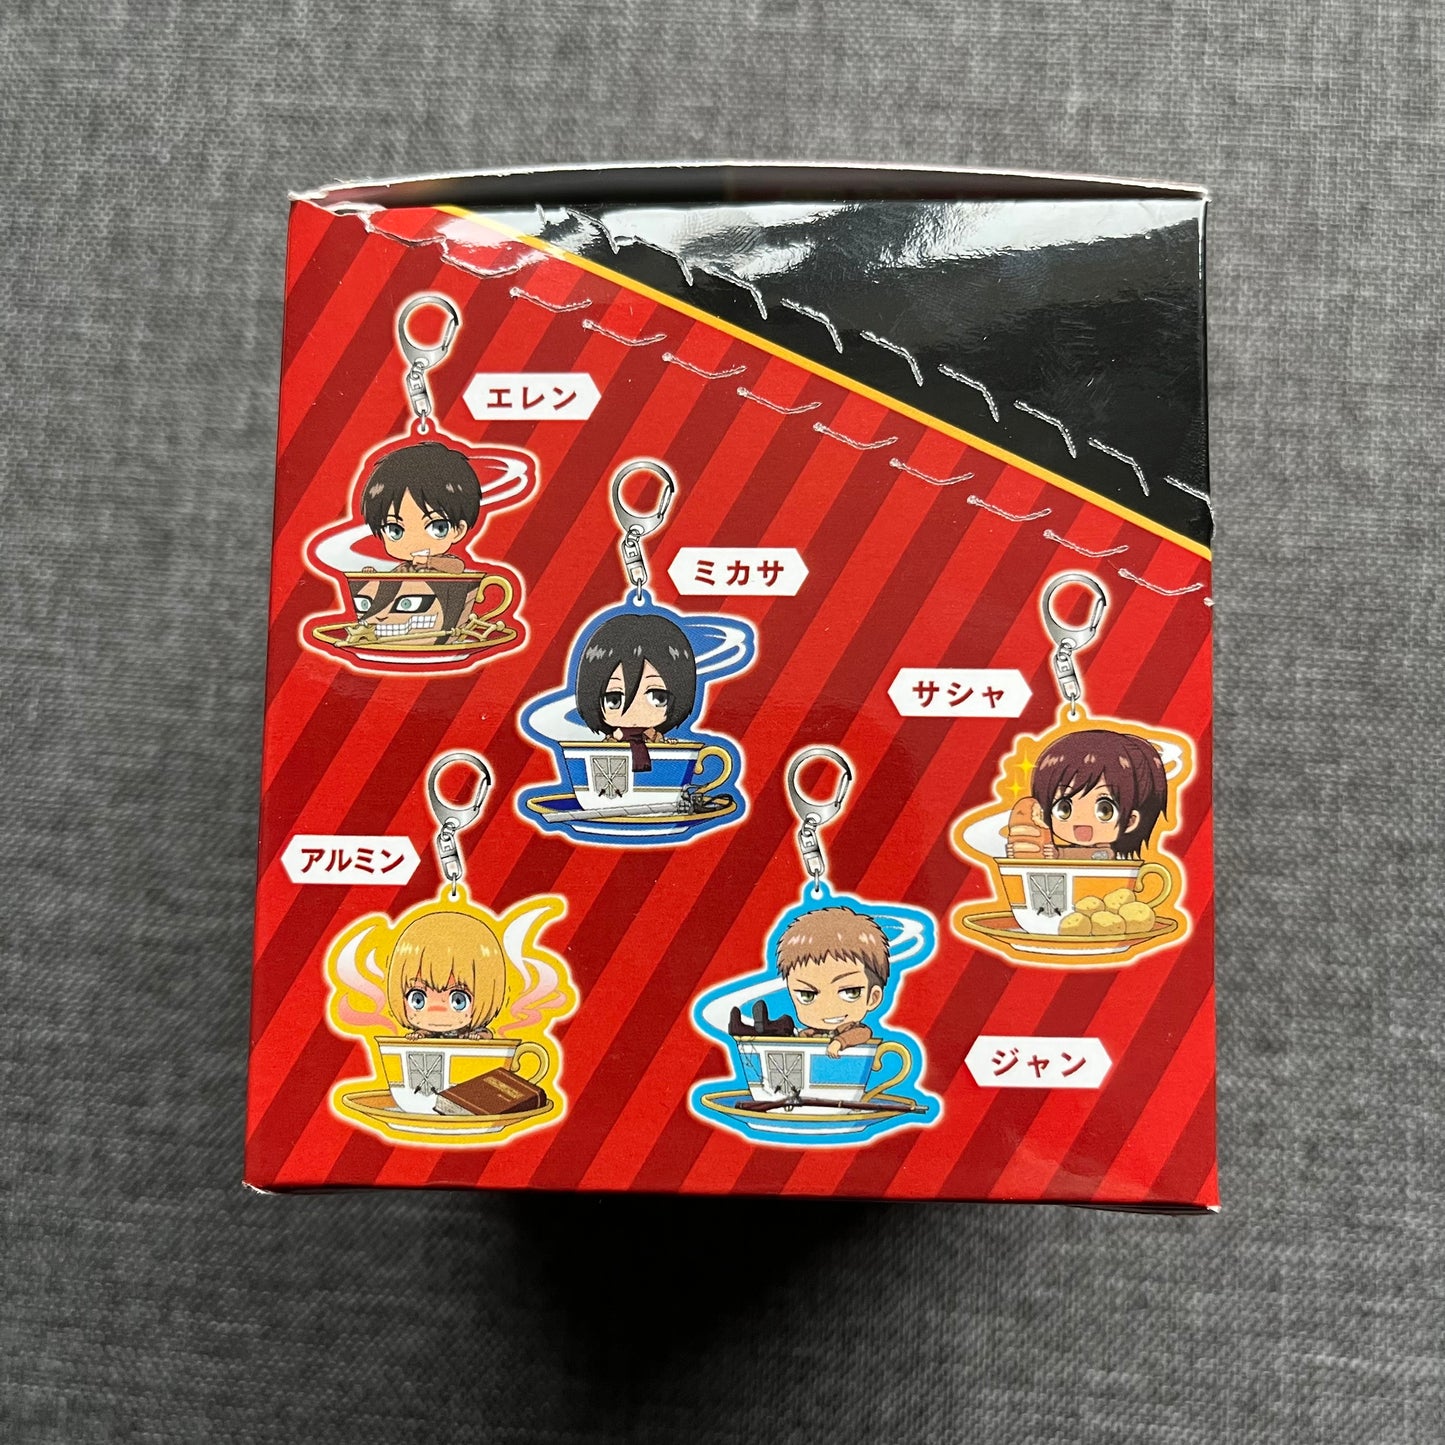 Attack on Titan Teacup Charm Blind Bags